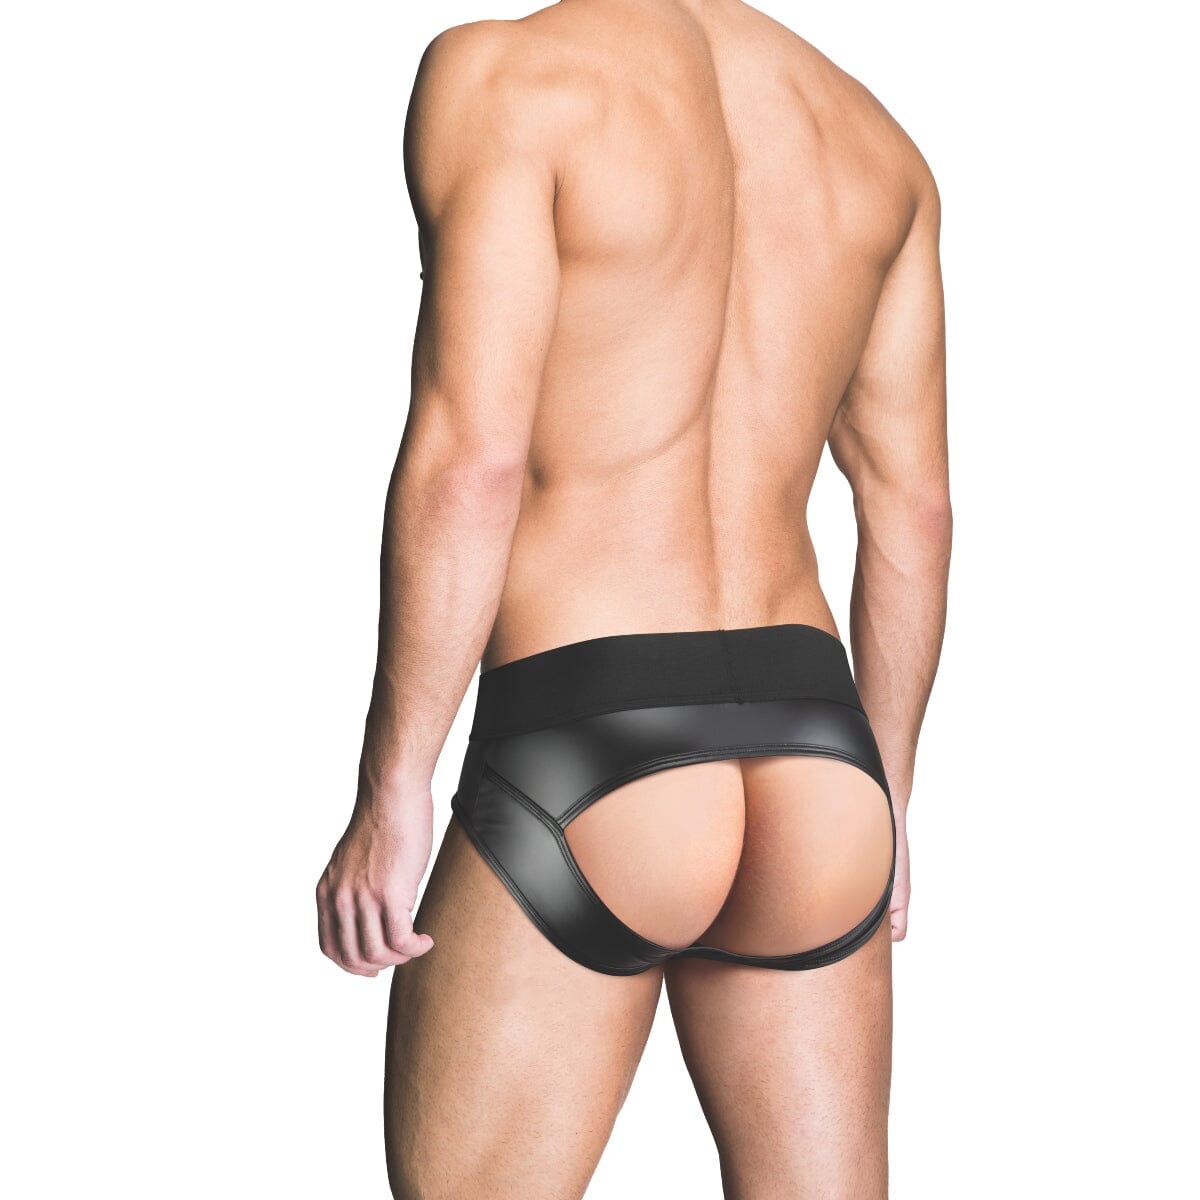 Wetlook Ass-less Brief with Backless Design for Men